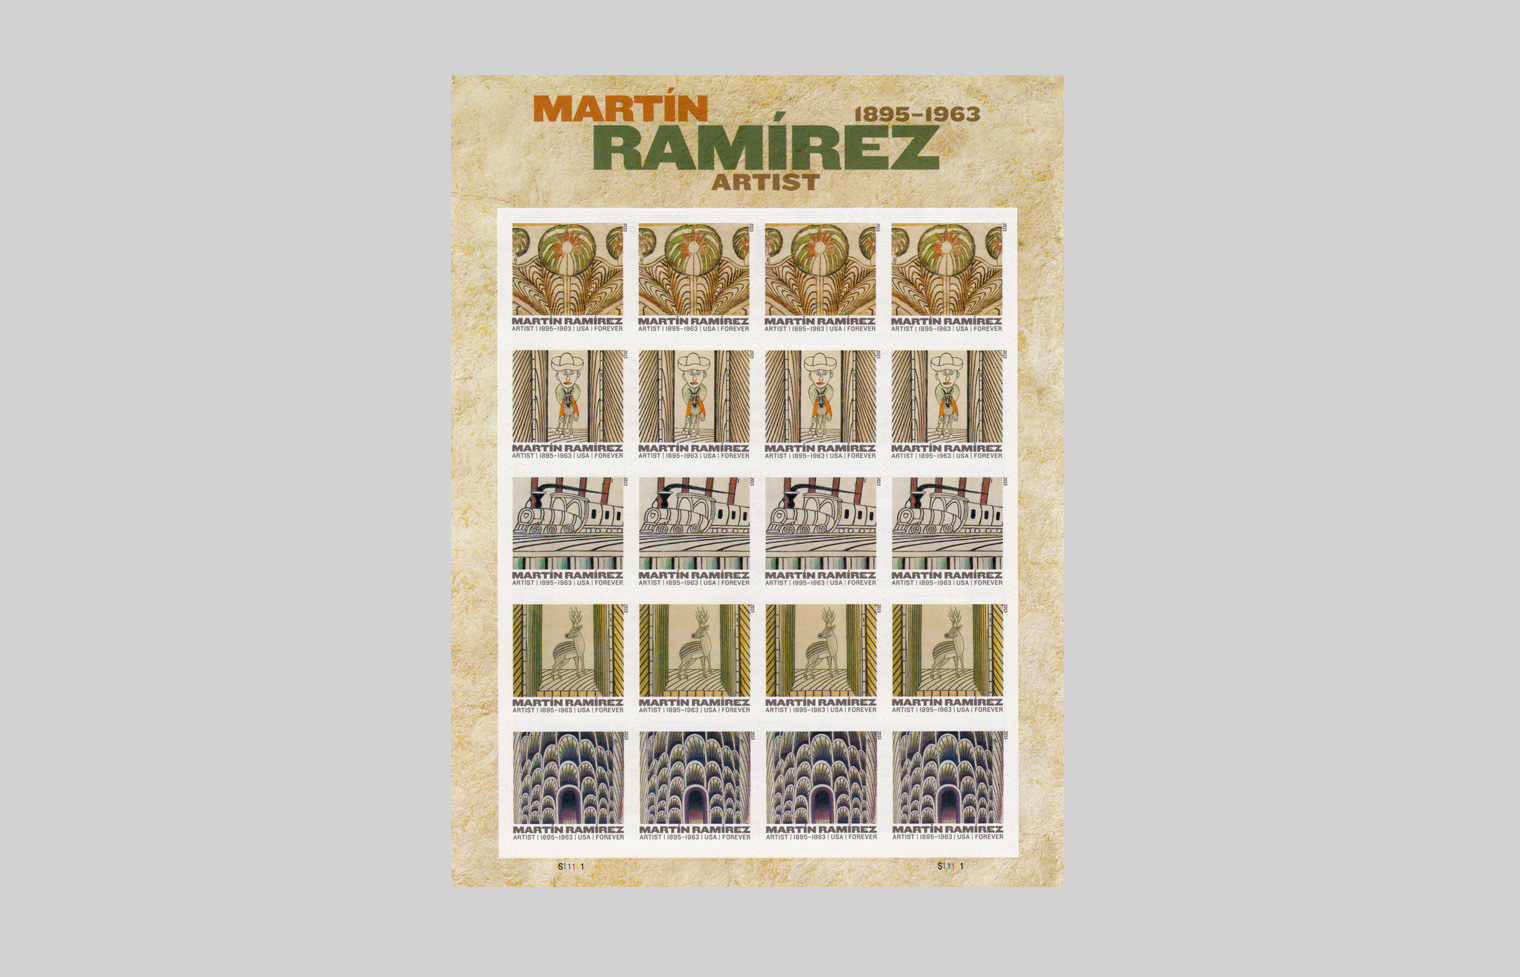 Martín Ramírez stamp sheet shows his art depicting animals, trains, and tunnels with his distinctive line work.